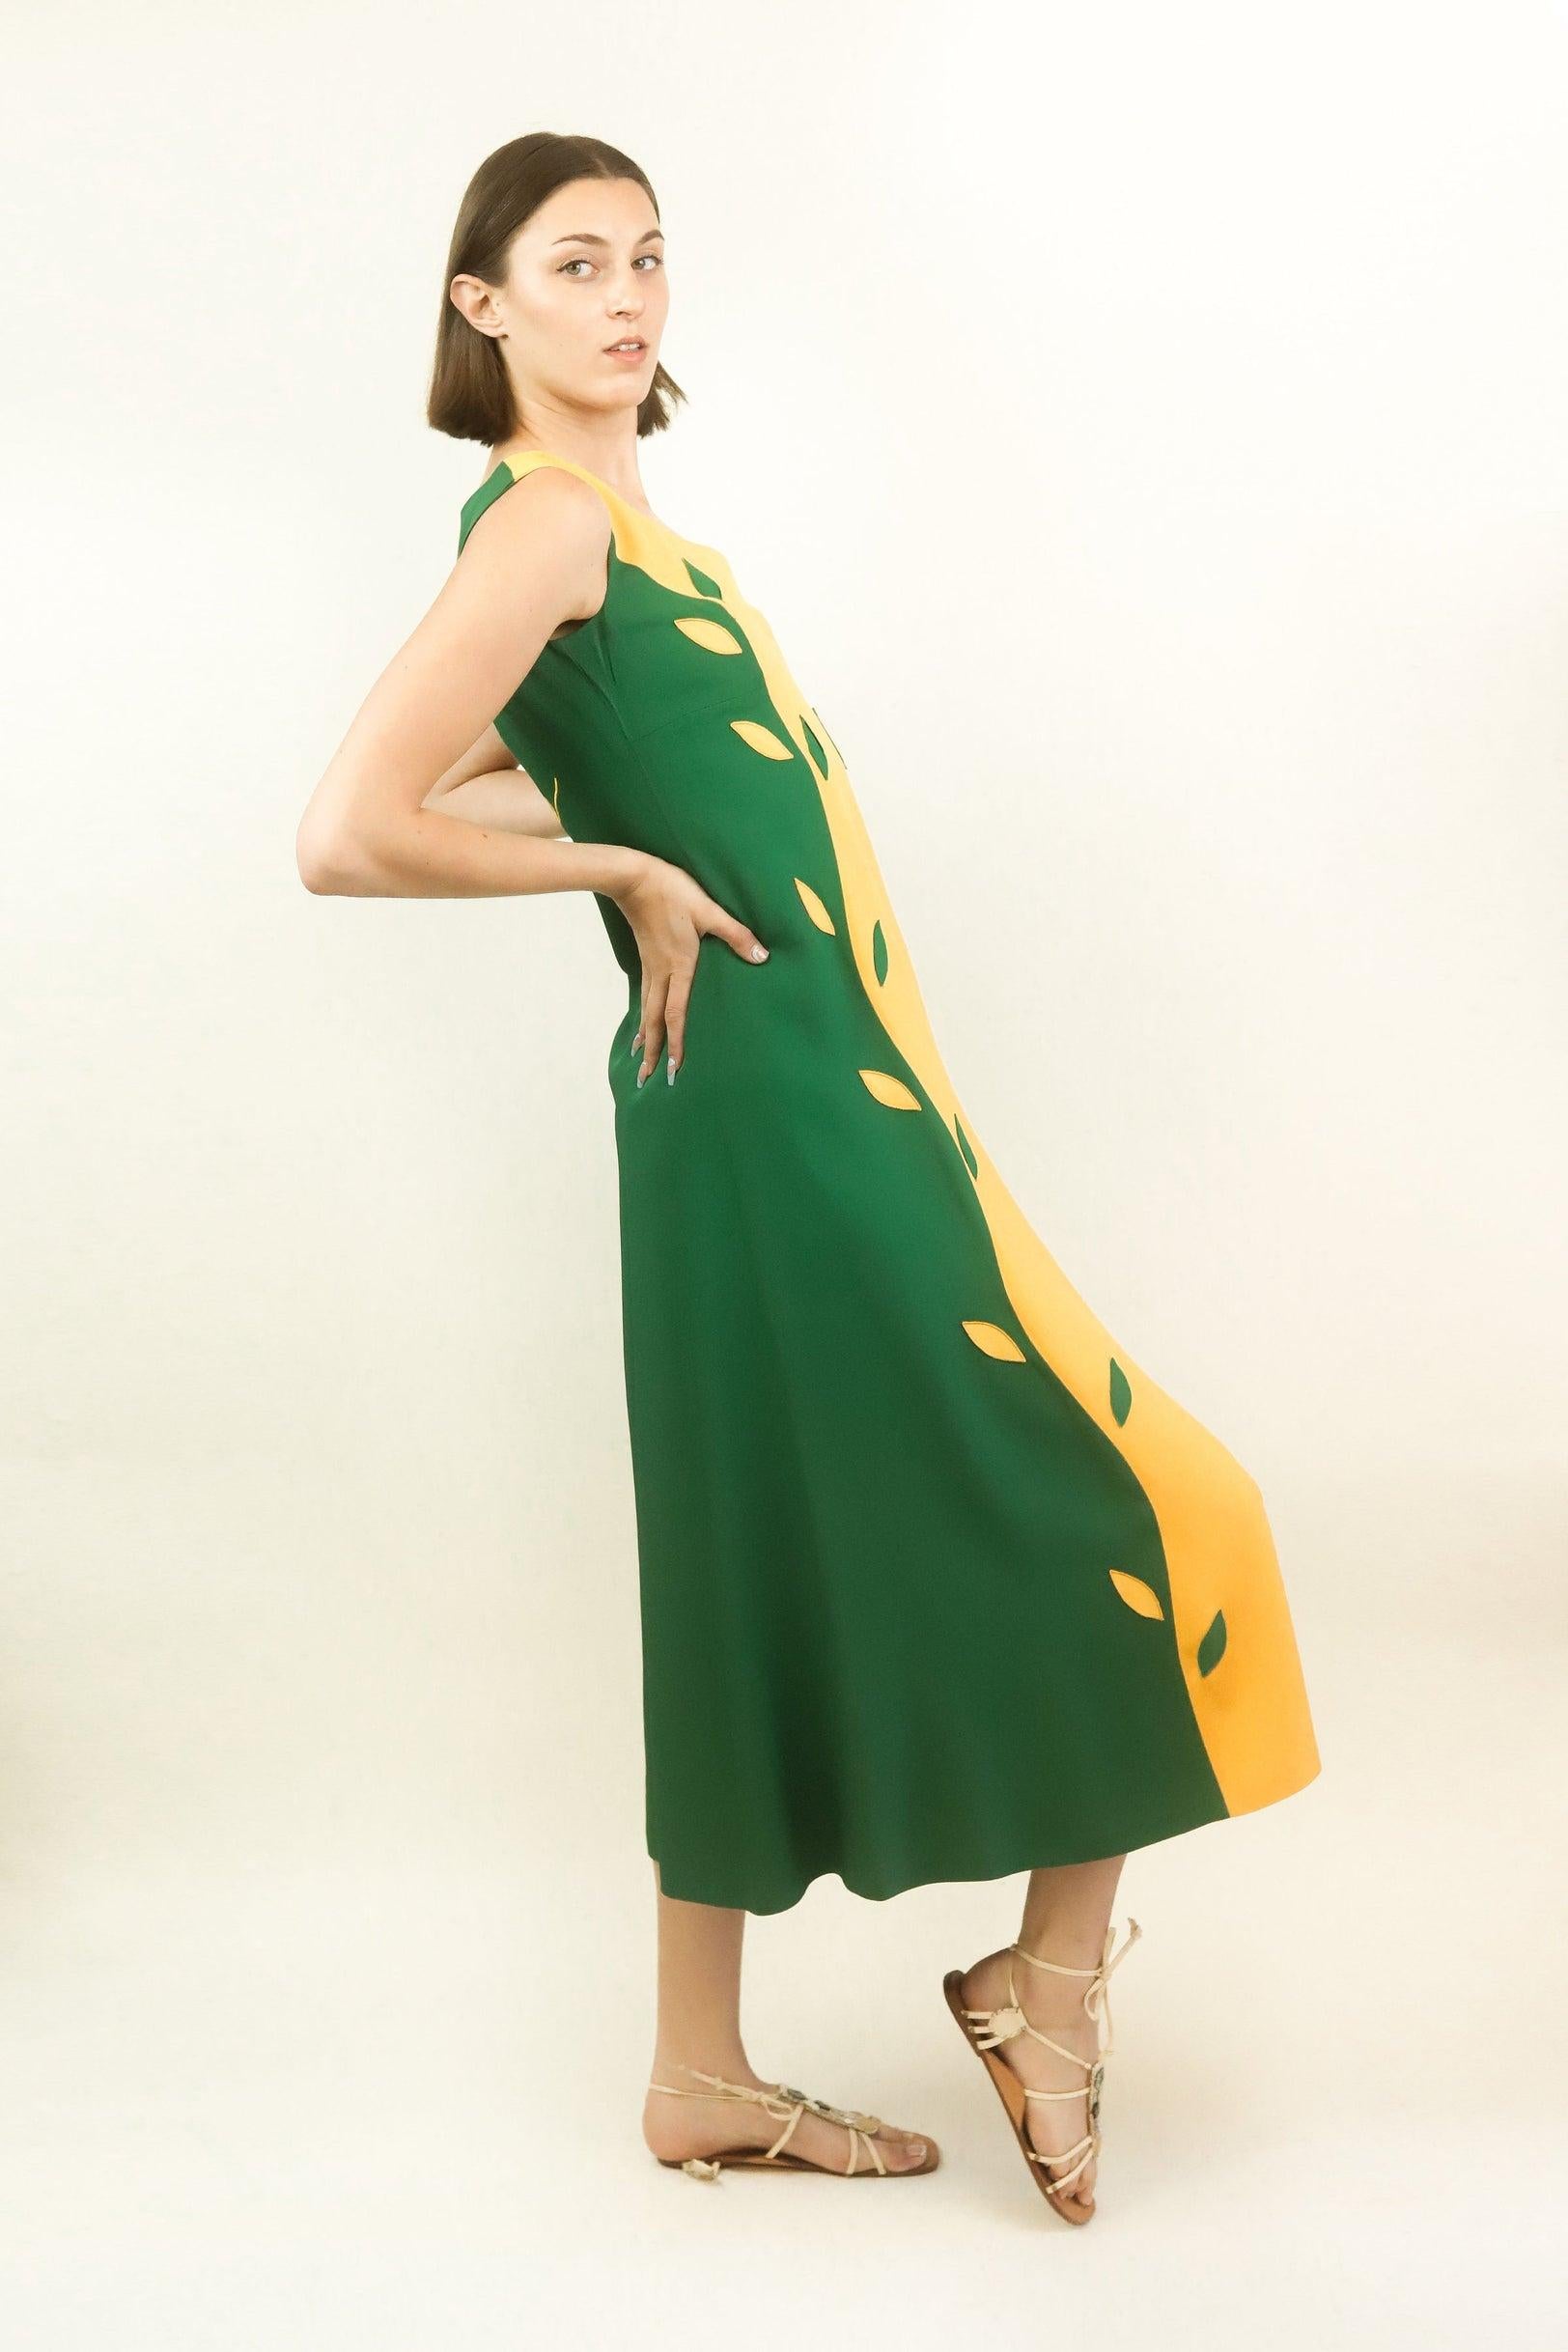 Be the life of the party in this incredible 1994 Moschino dress. Perfect for wedding or birthday celebrations, this dress will have heads turning. Style for a garden party with a vibrant yellow clutch and chunky heels. 

The back embroidery